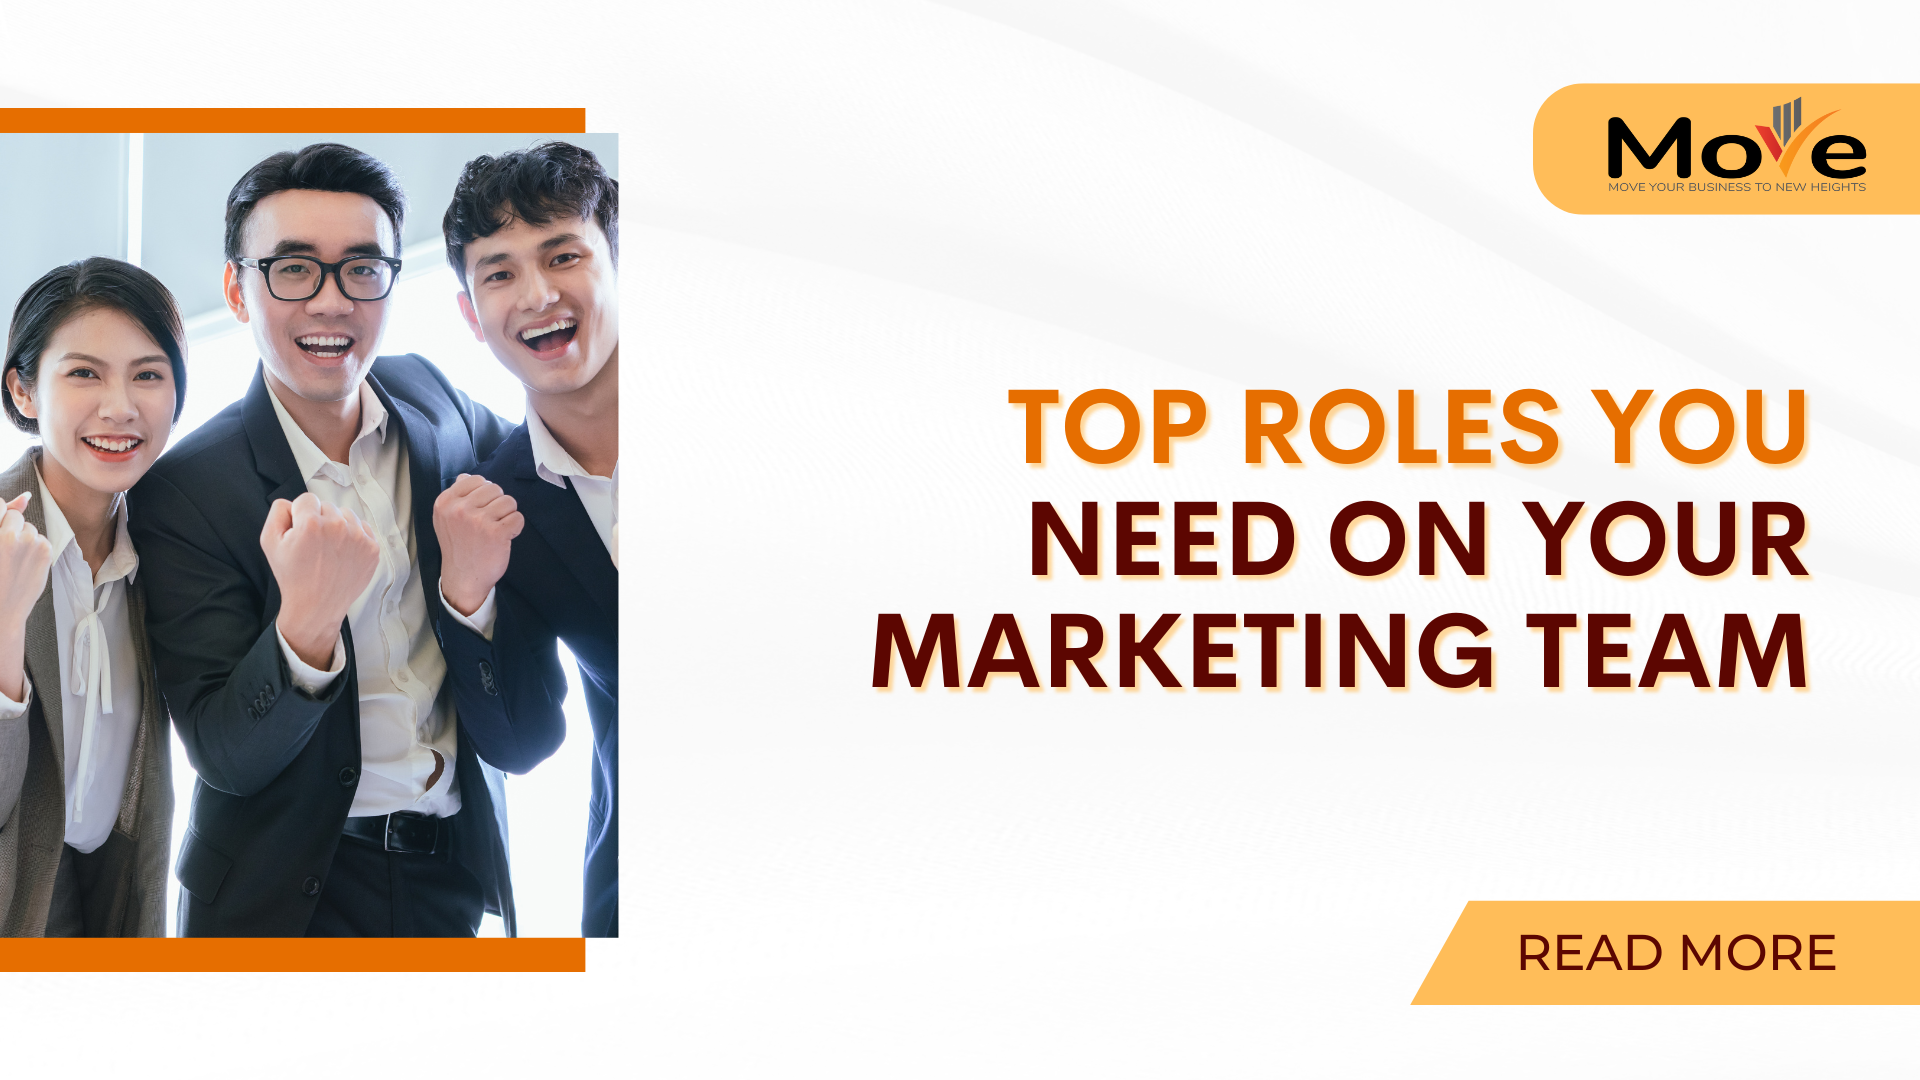 Top Roles You Need on Your Marketing Team